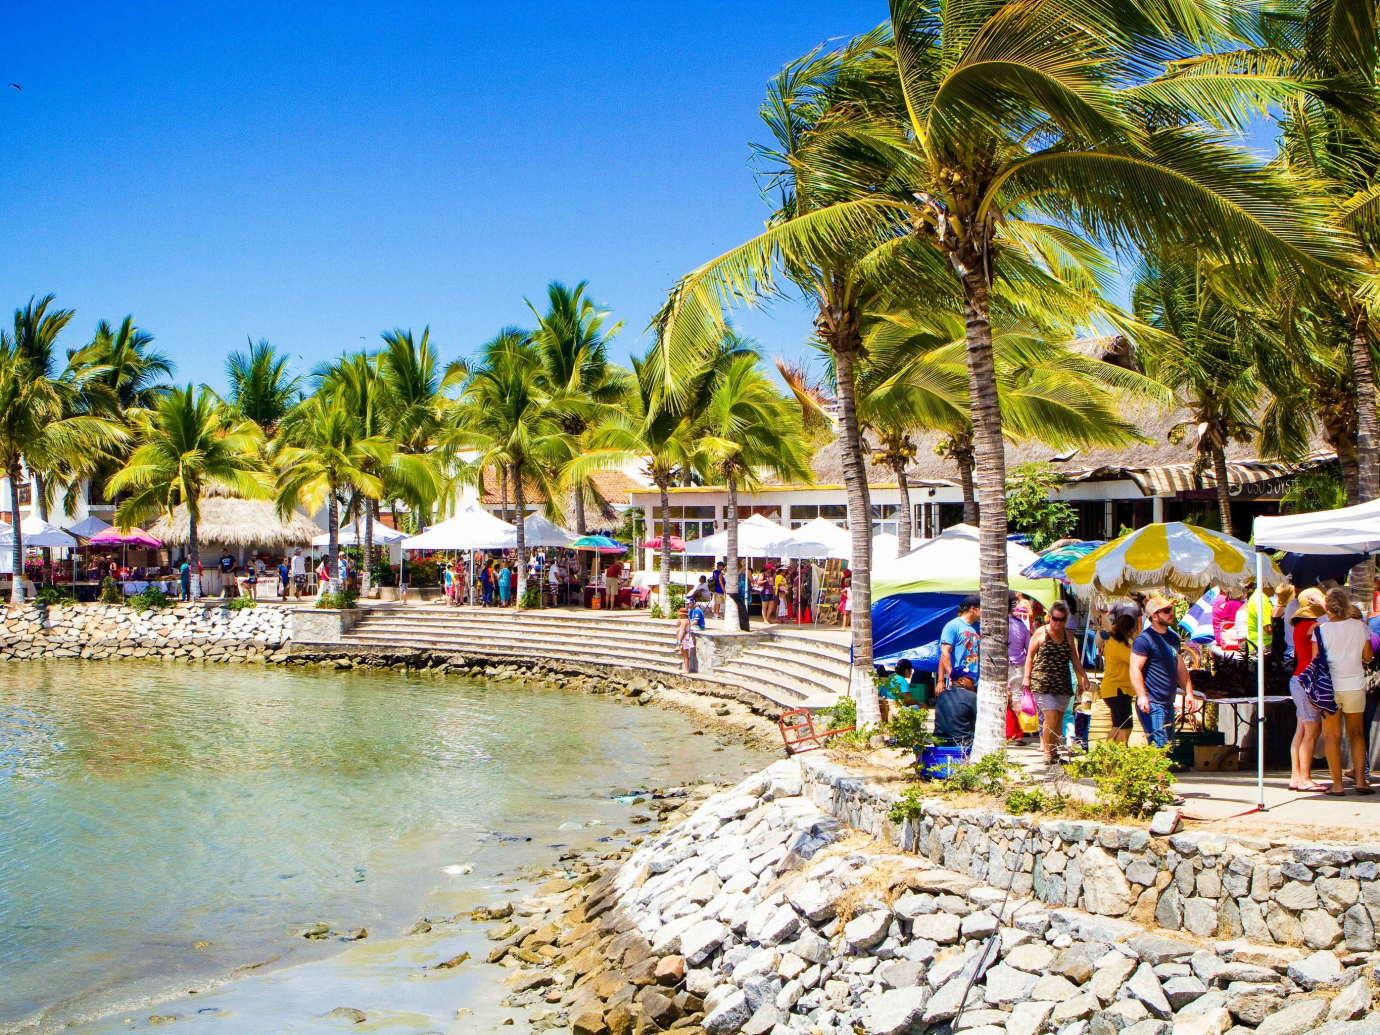 Lively area with tents and set up shops in Puerto Vallarta